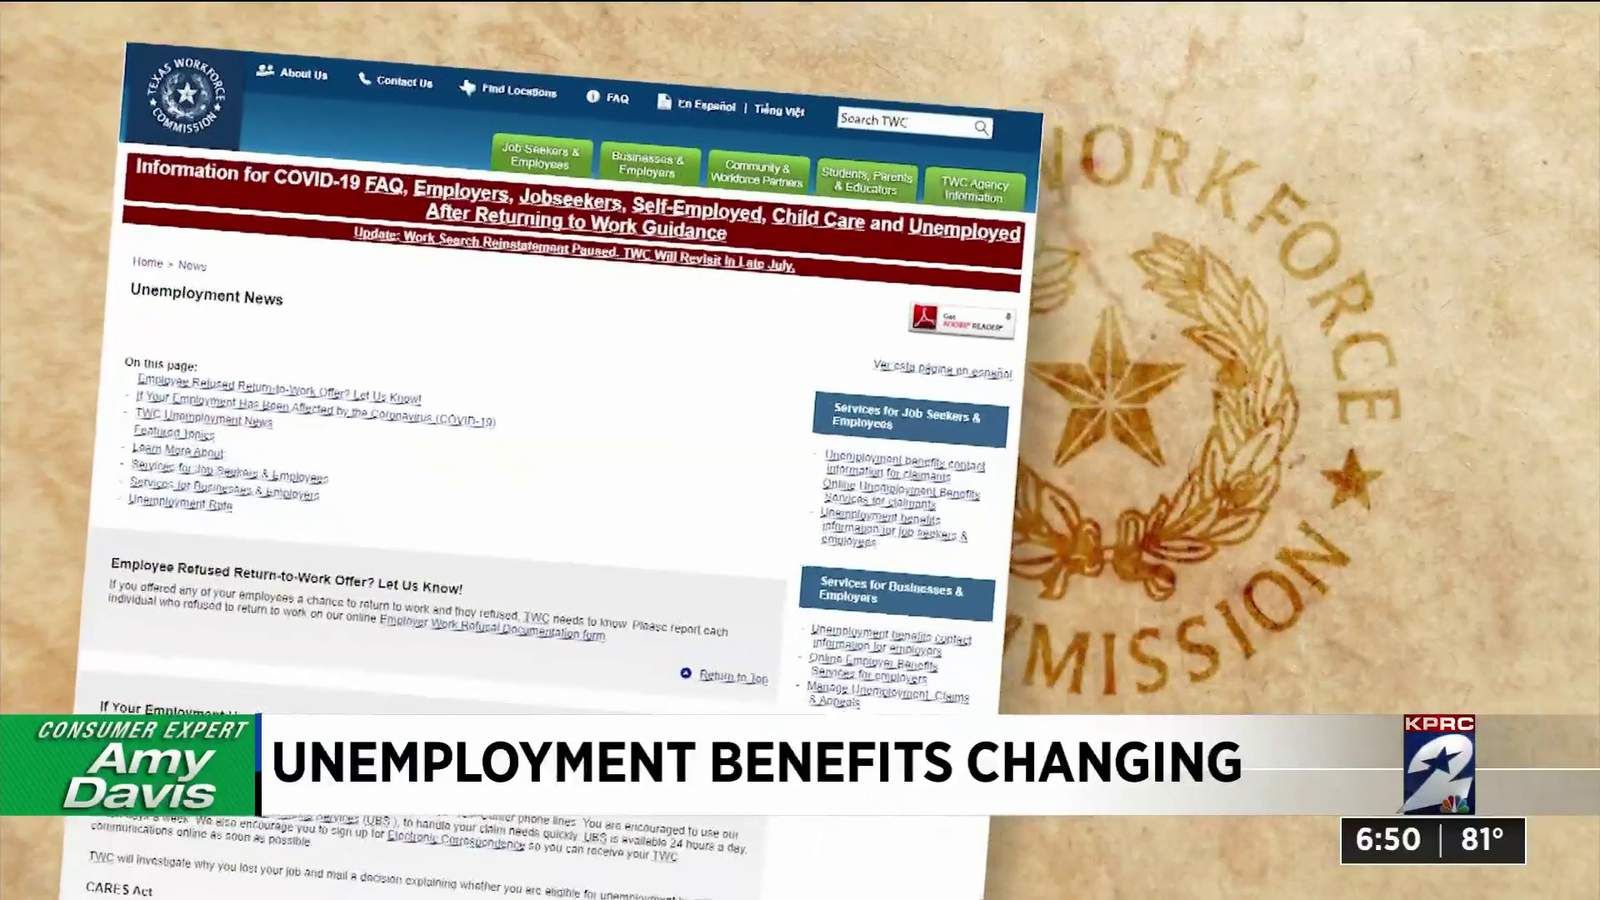 Here are the big changes coming to unemployment benefits amid the COVID-19 pandemic